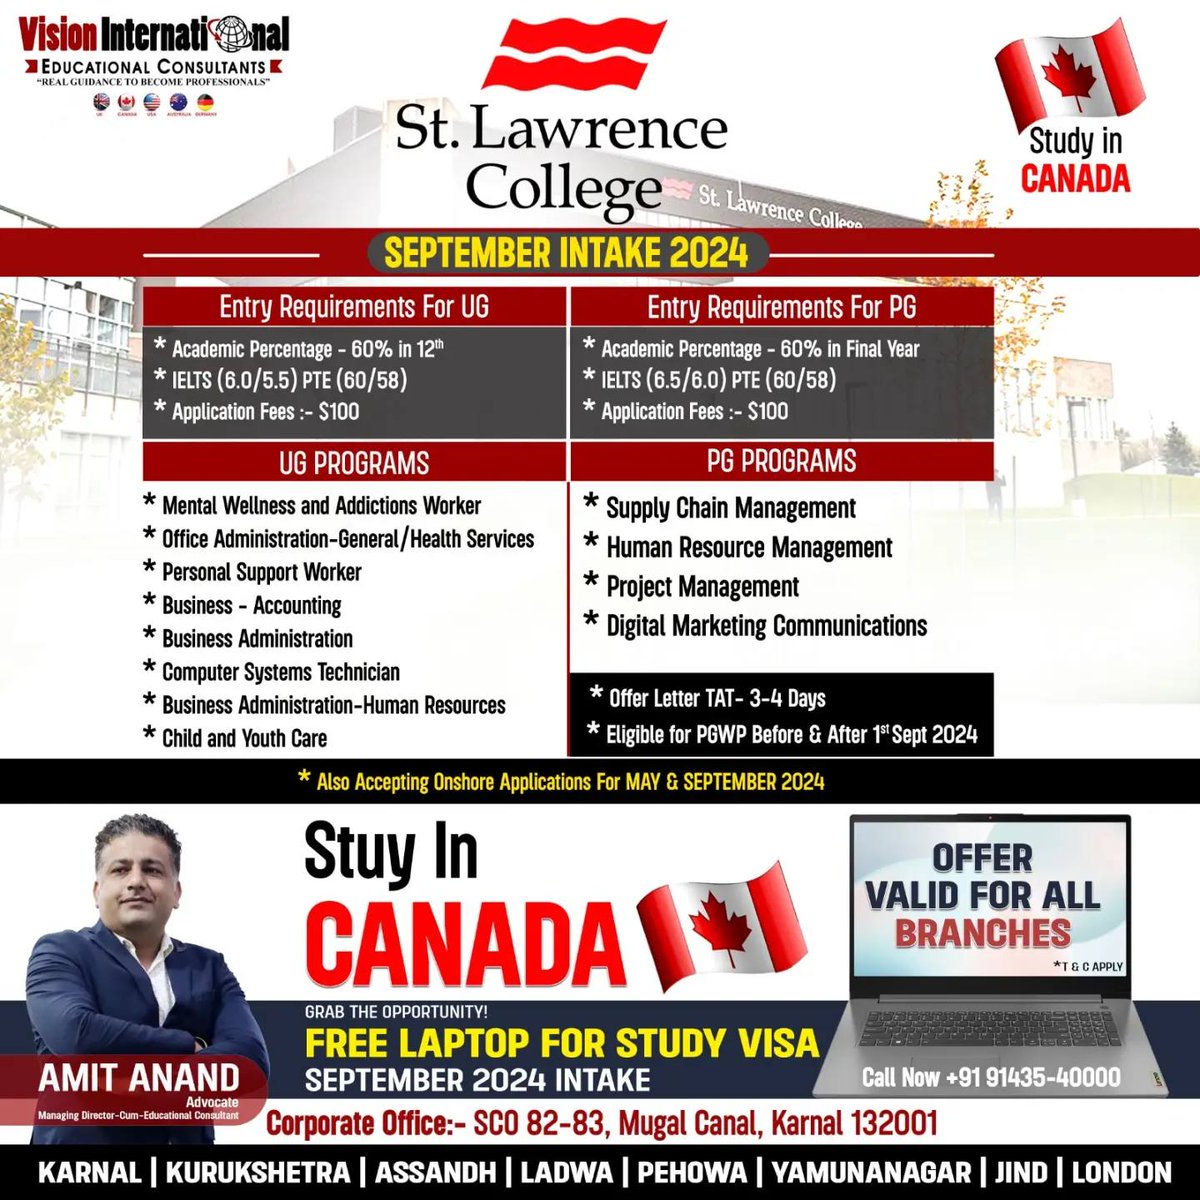 Study in St. Lawrence College with Vision International Educational Consultants. Enroll yourself for September'24 intake!
Call: 9143540000
#StLawrenceCollege #StudyVisaExperts #BestStudyVisaConsultants #StudyAbroad2024 #StudyInCanada #CanadaStudyVisa #CanadaUniversities